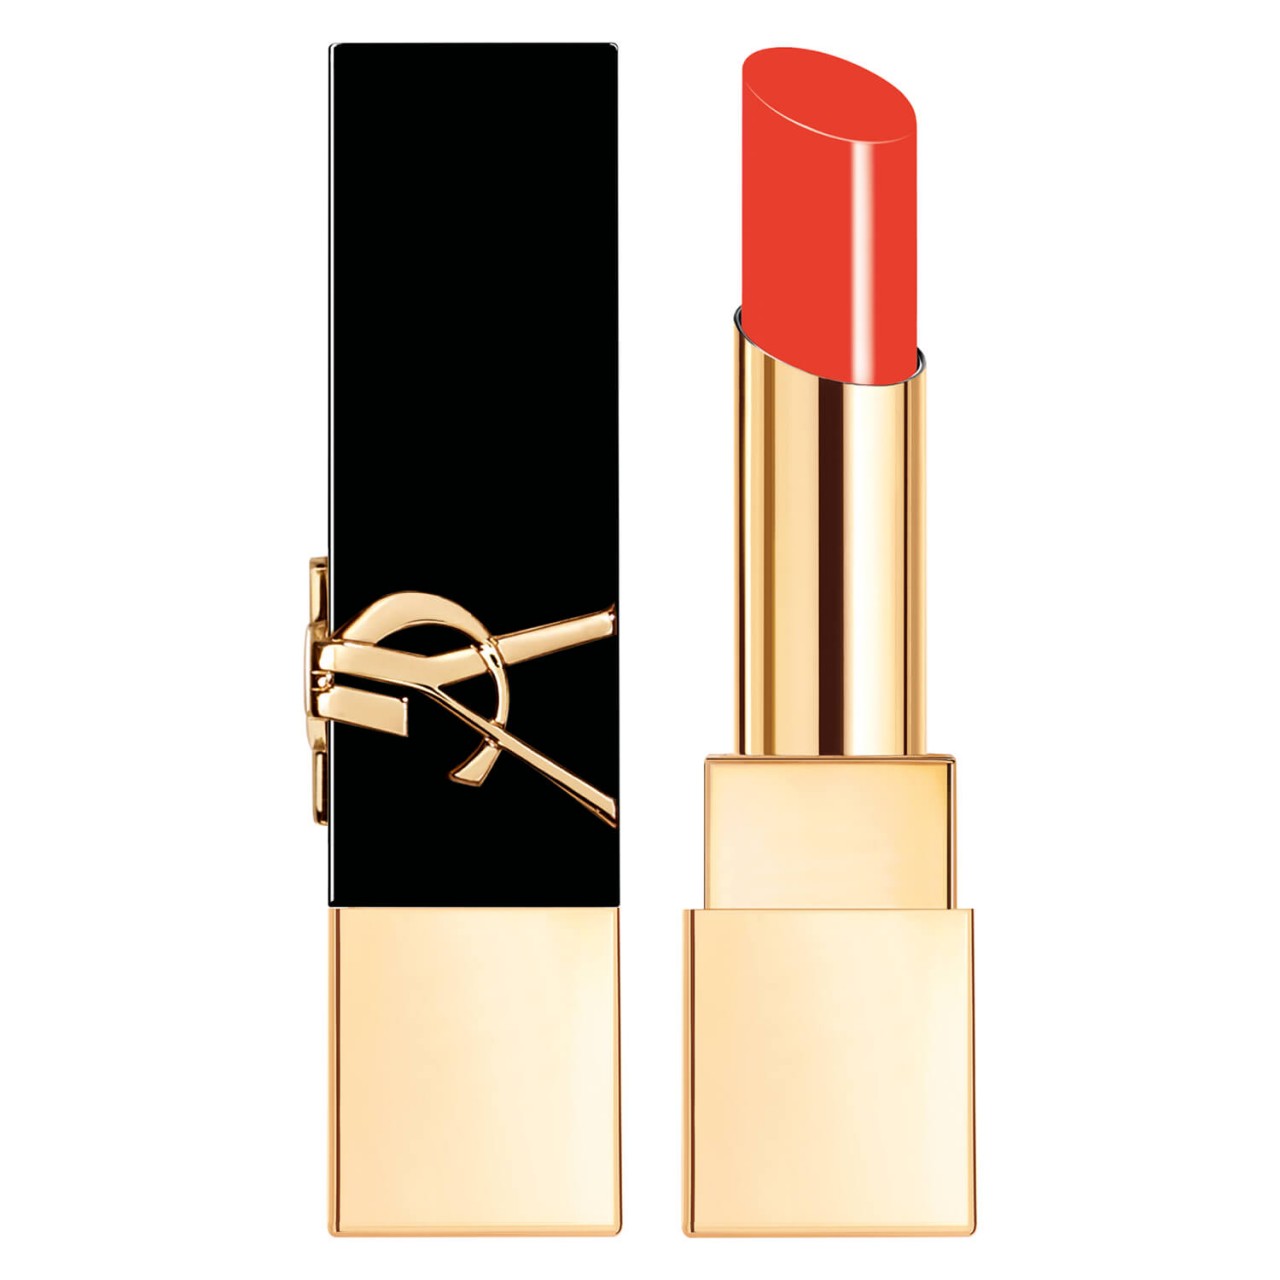 Rouge Pur Couture - The Bold Unhibited Flame 07 von Yves Saint Laurent